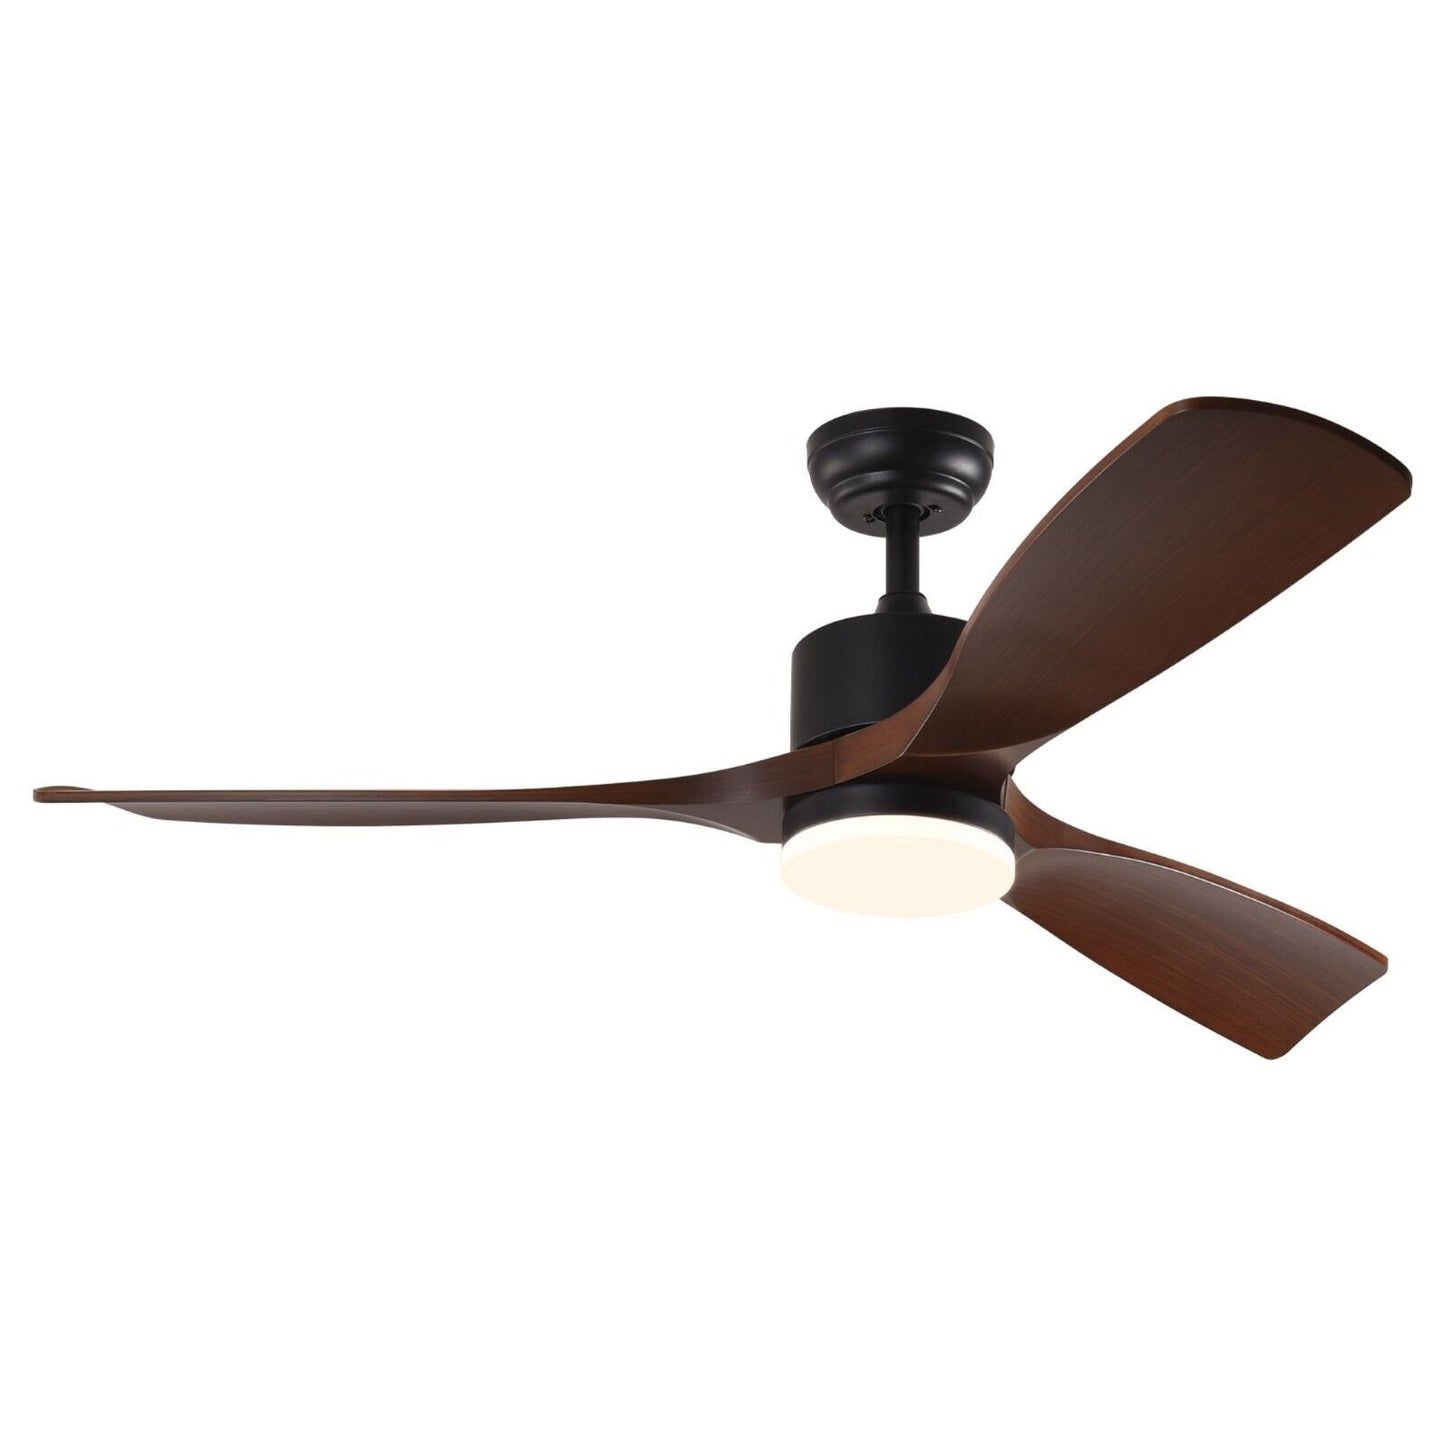 52" Dimmable Remote Control Integrated Light Ceiling Fan